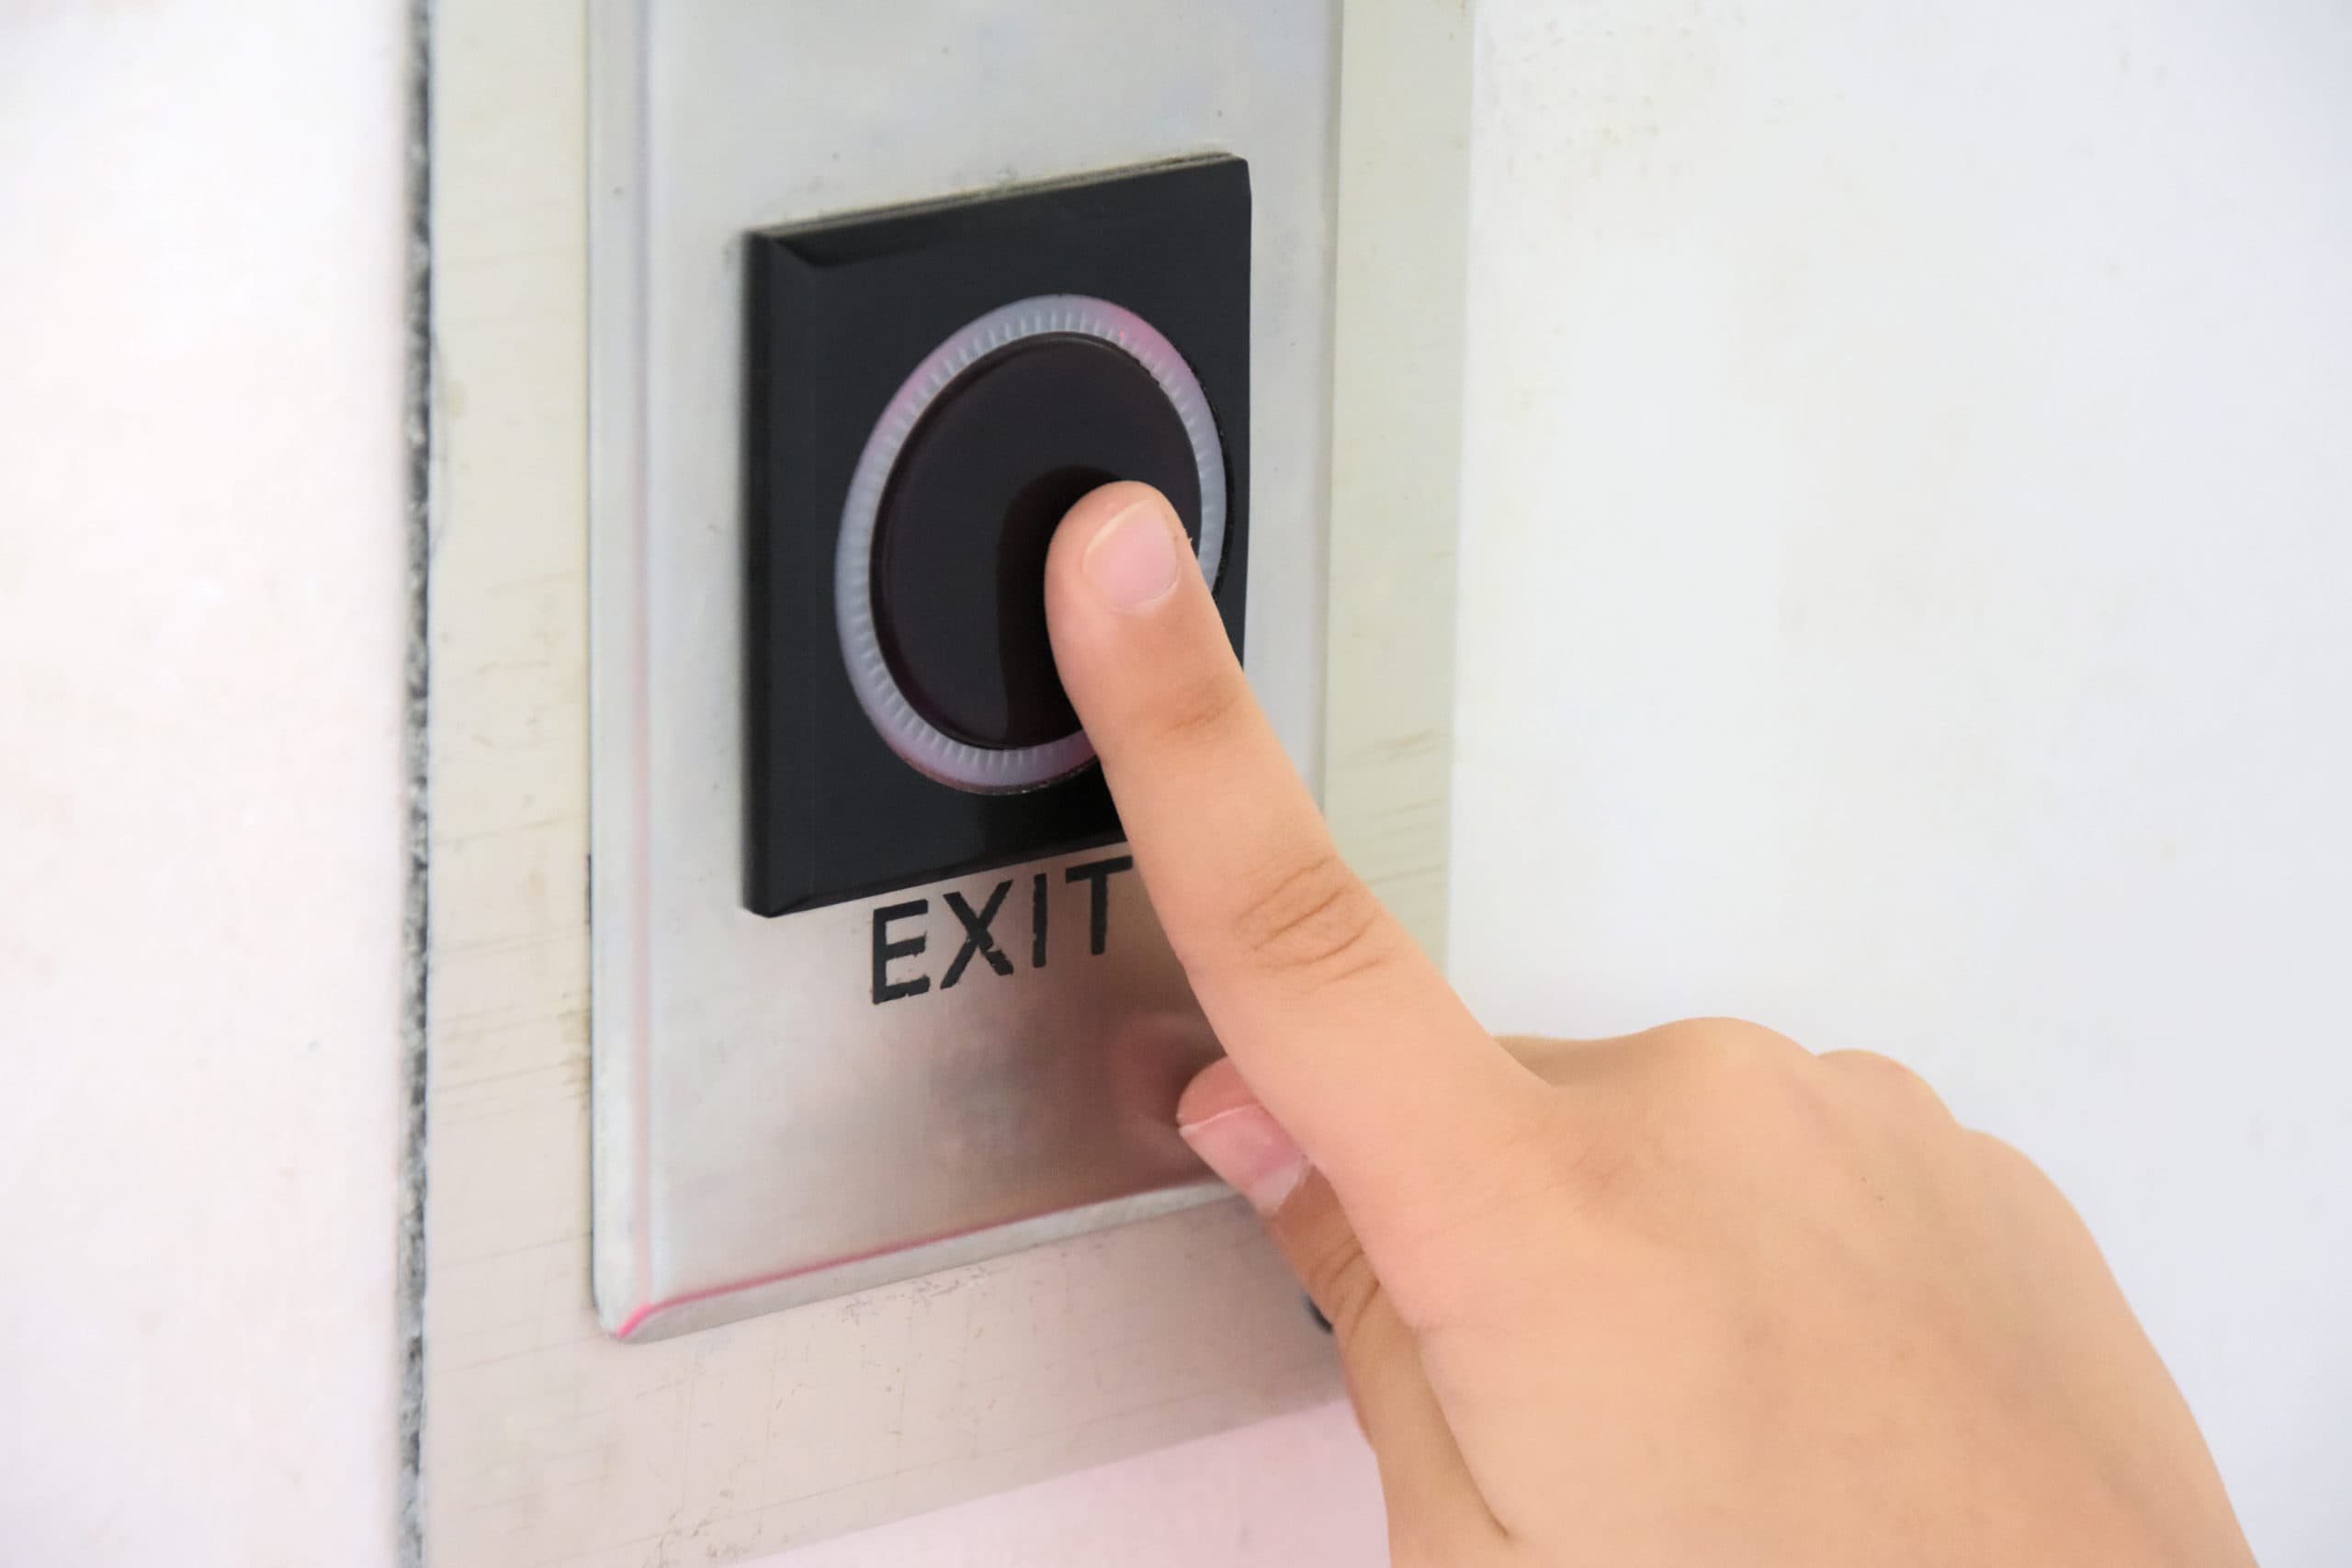 This is a persons finger using a push to exit button